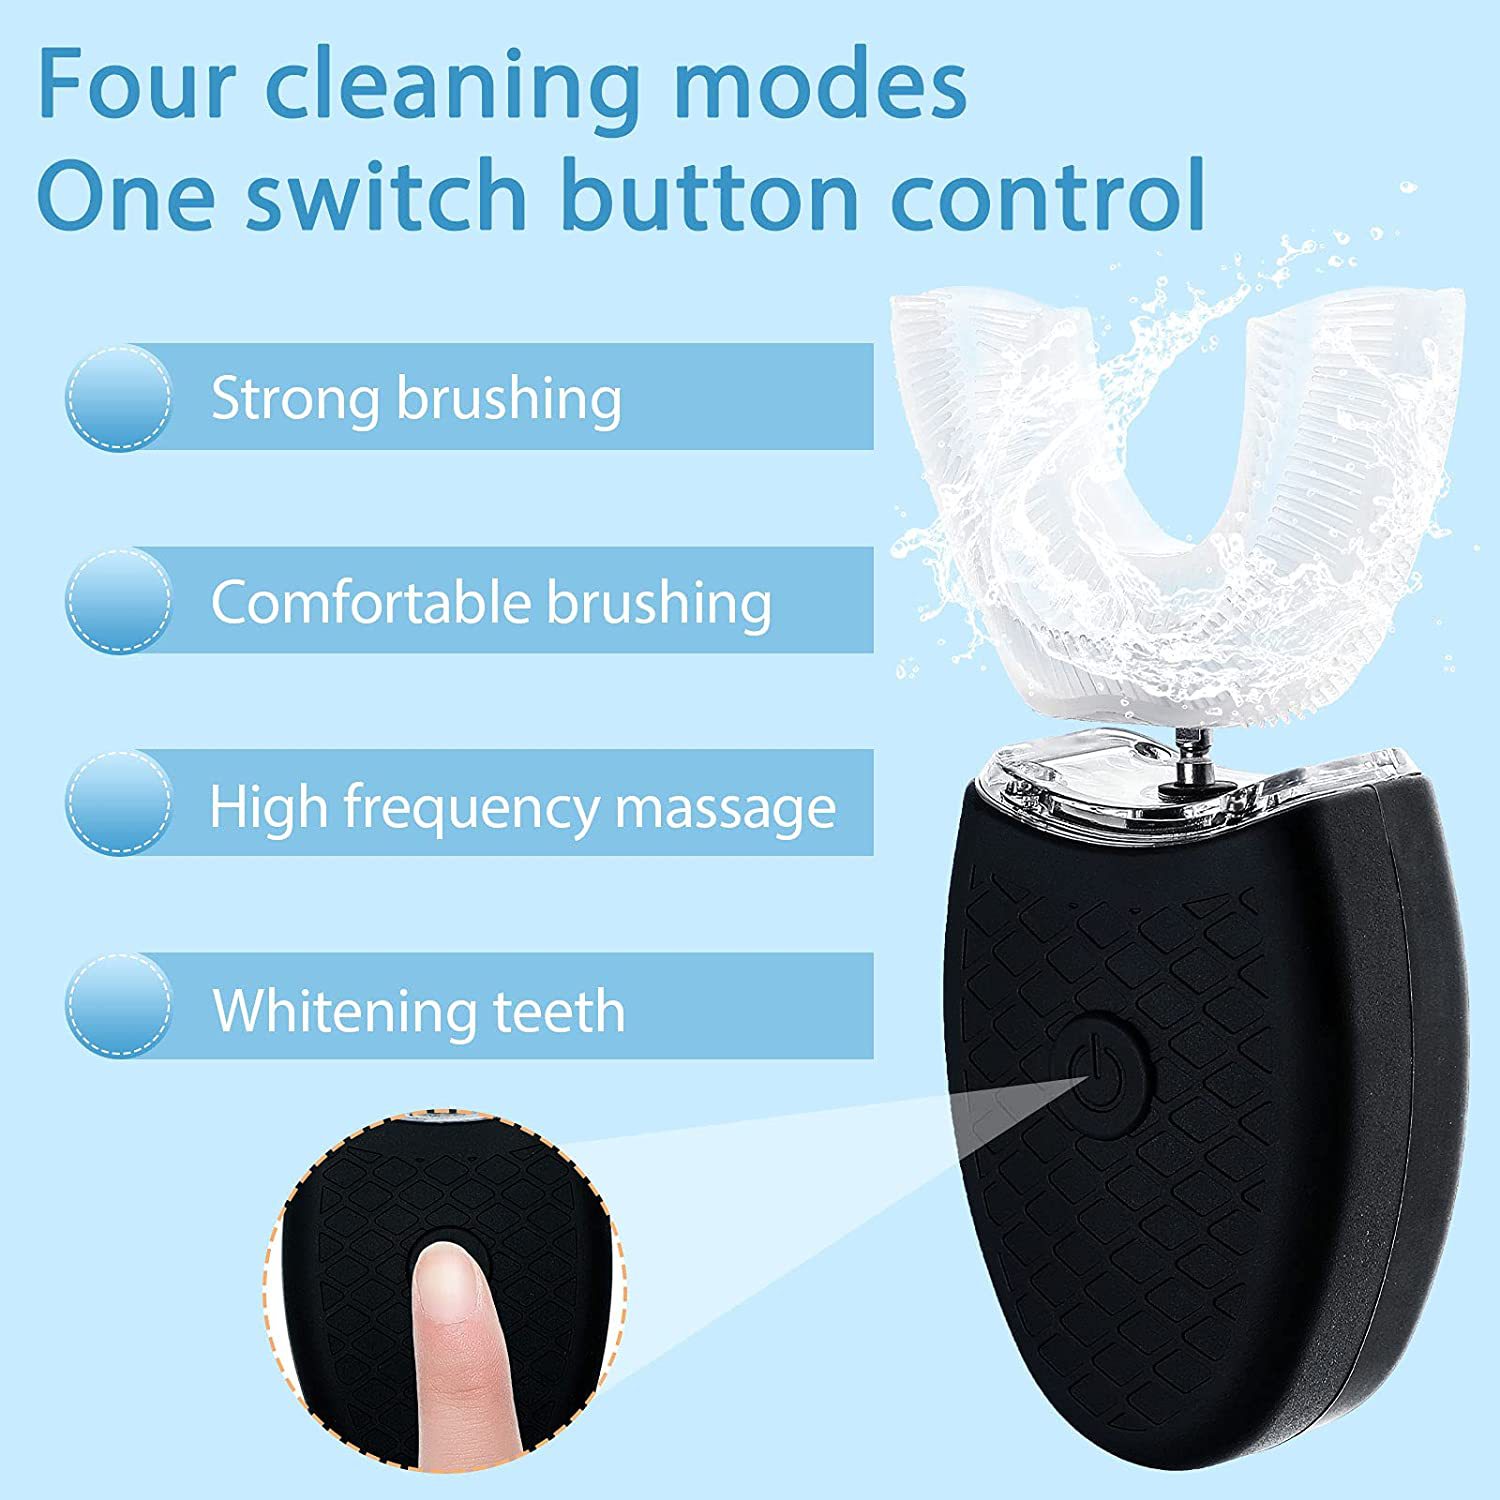 revolutionize your oral hygiene with the electric ultrasonic u shaped toothbrush 360 mouth cleansing led light waterproof ipx7 certified 3 cleansing modes whole mouth whitening details 2